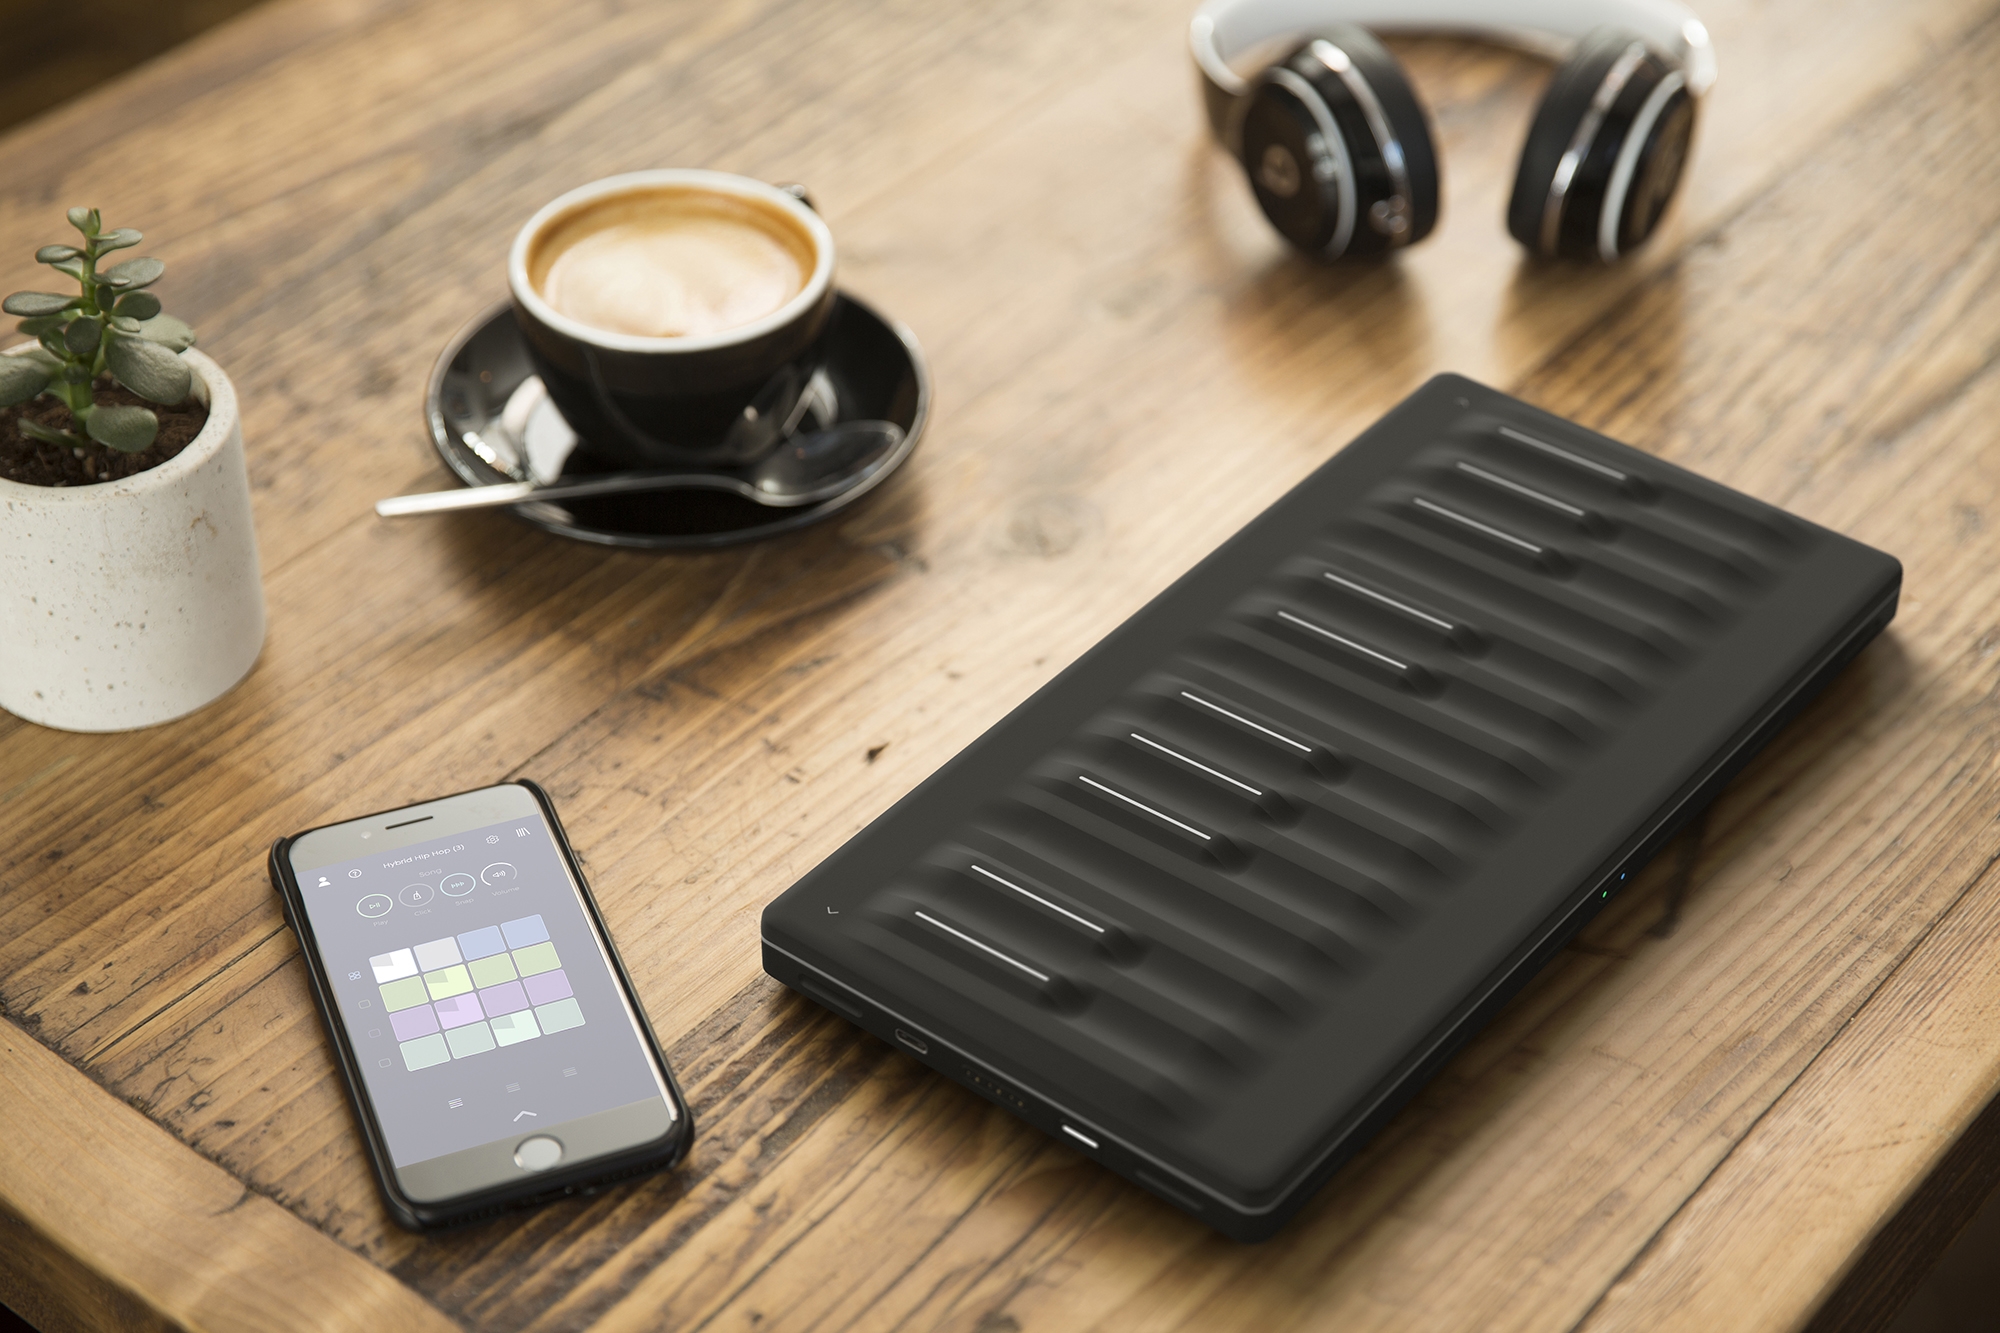 Musical instrument company Roli files for administration, will relaunch as Luminary | DeviceDaily.com